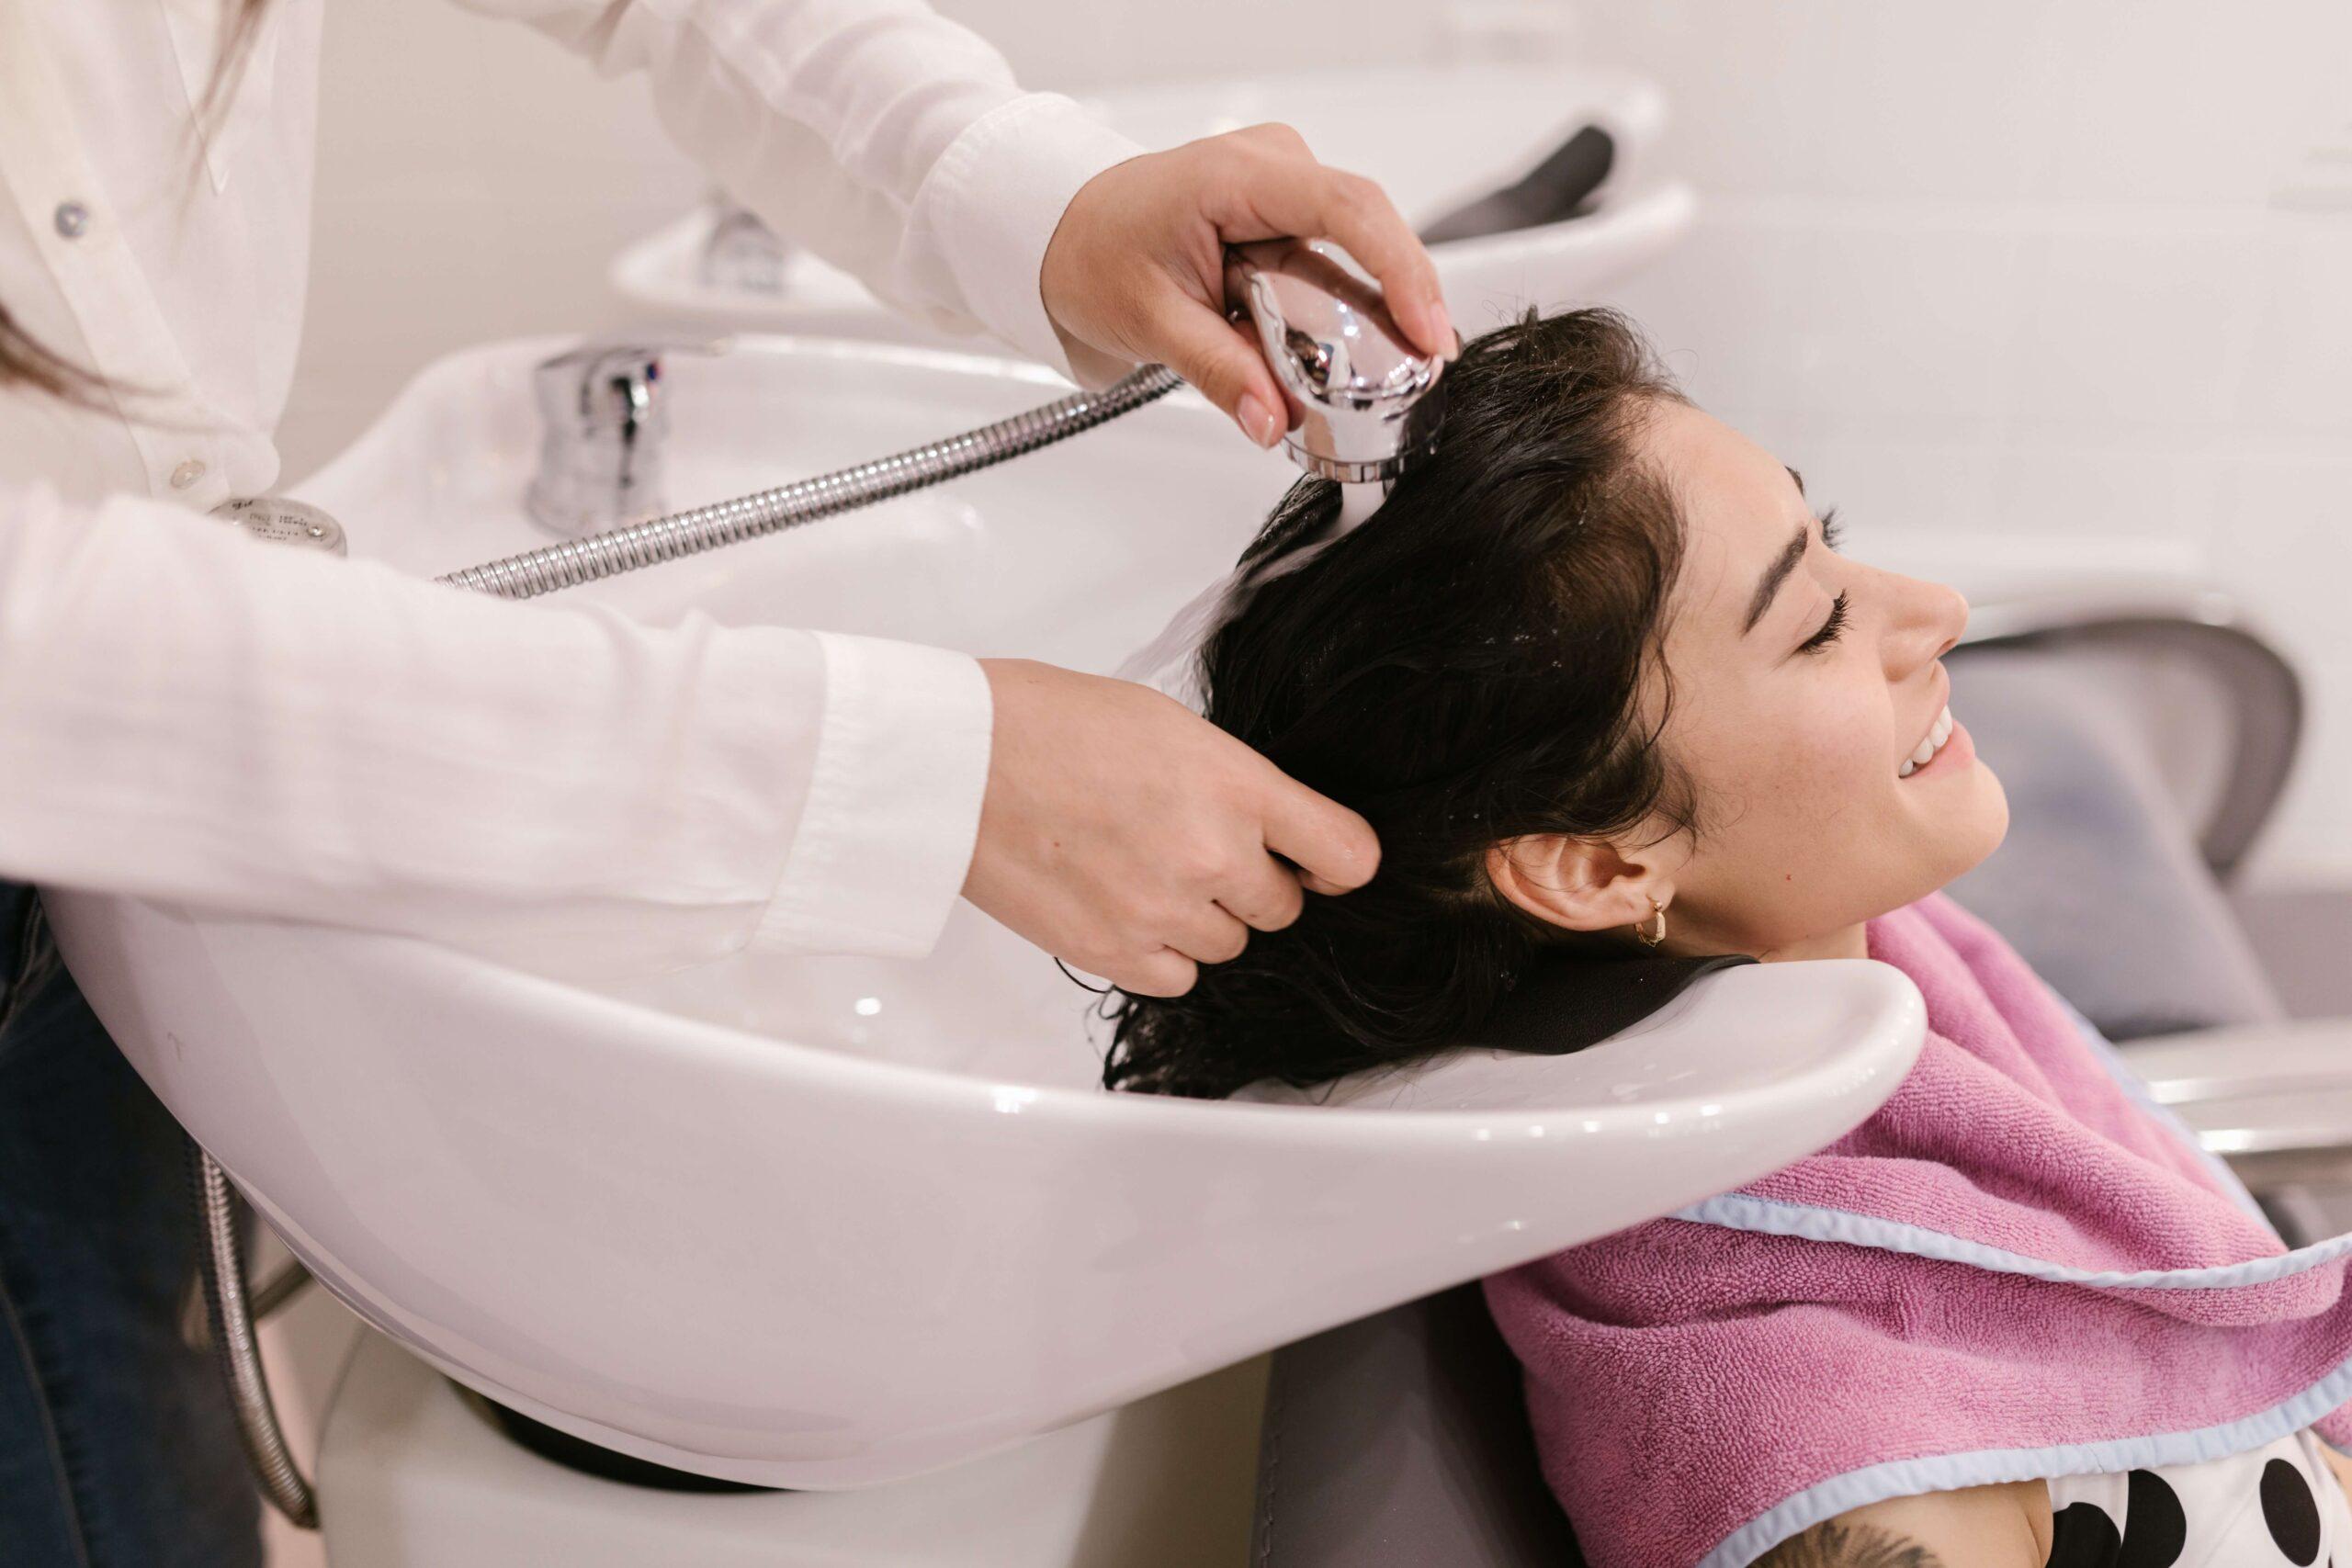 Woman getting hair washed at a salon due to excessive dandruff from Seborrheic Dermatitis. Is Seborrheic Dermatitis associated with Celiac Disease